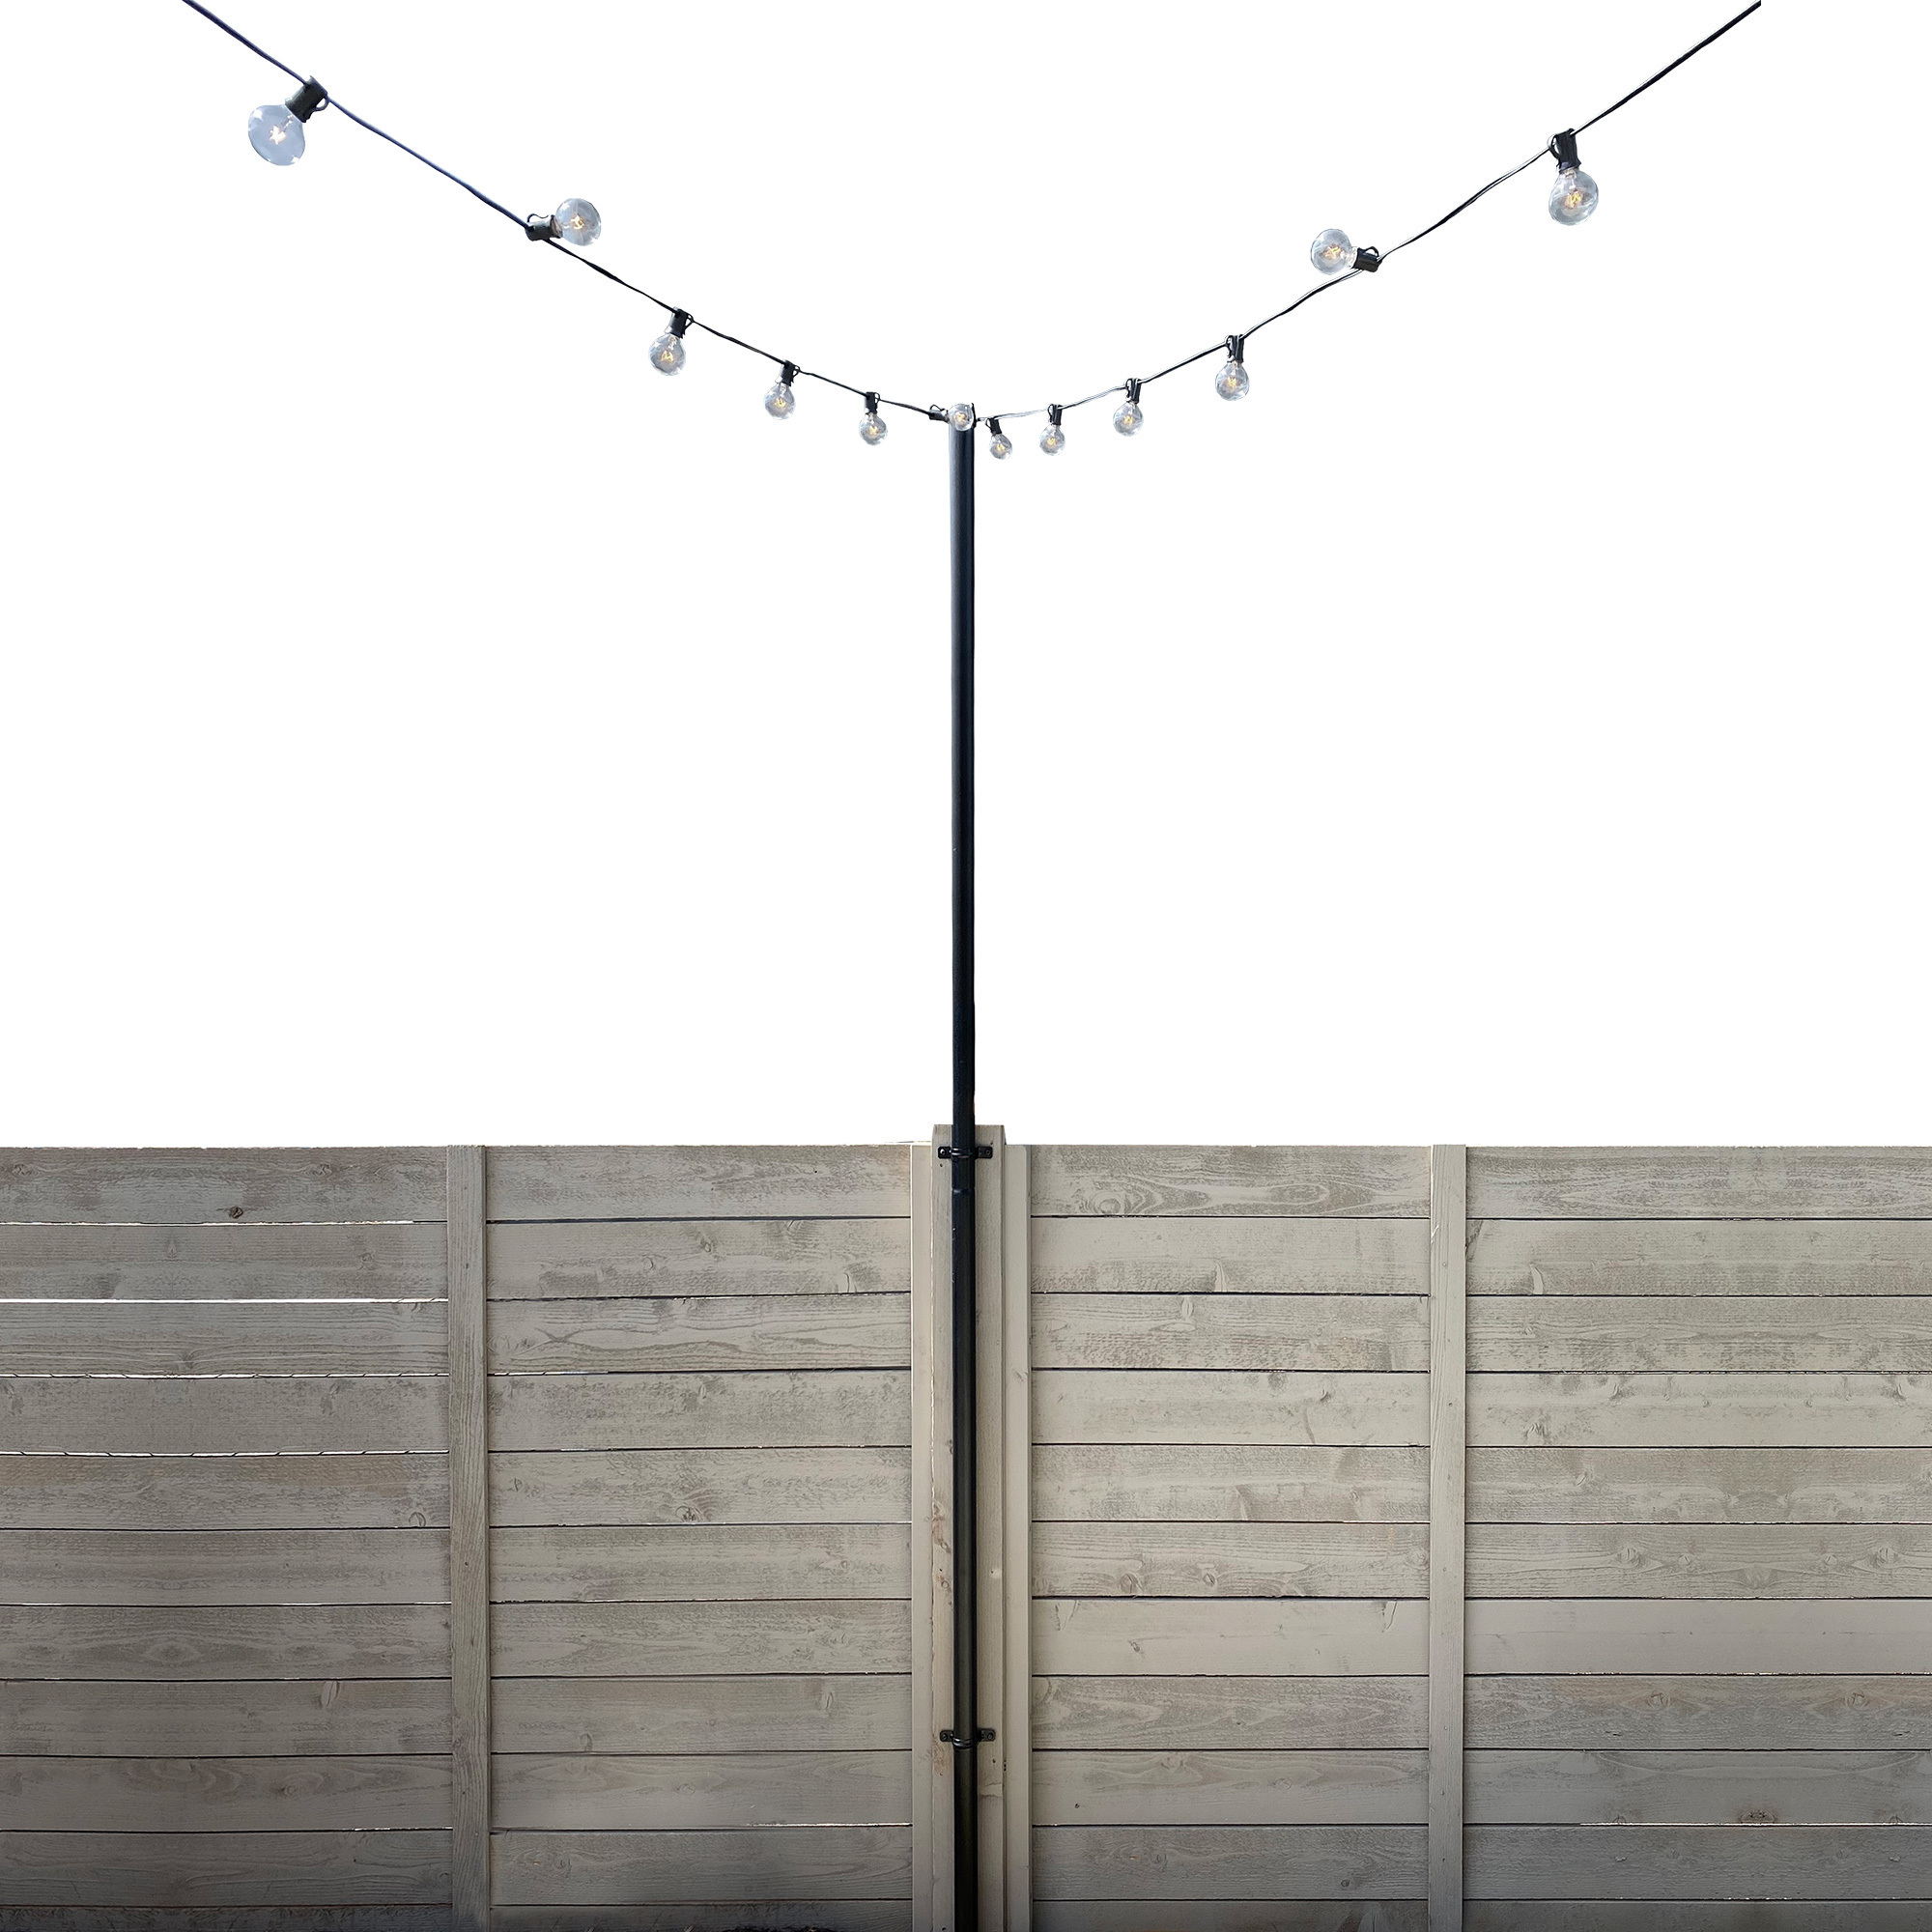 IYN, String Light Pole Stand with Mounting Brackets, Color Black, Included (qty.) 1 Model 32374